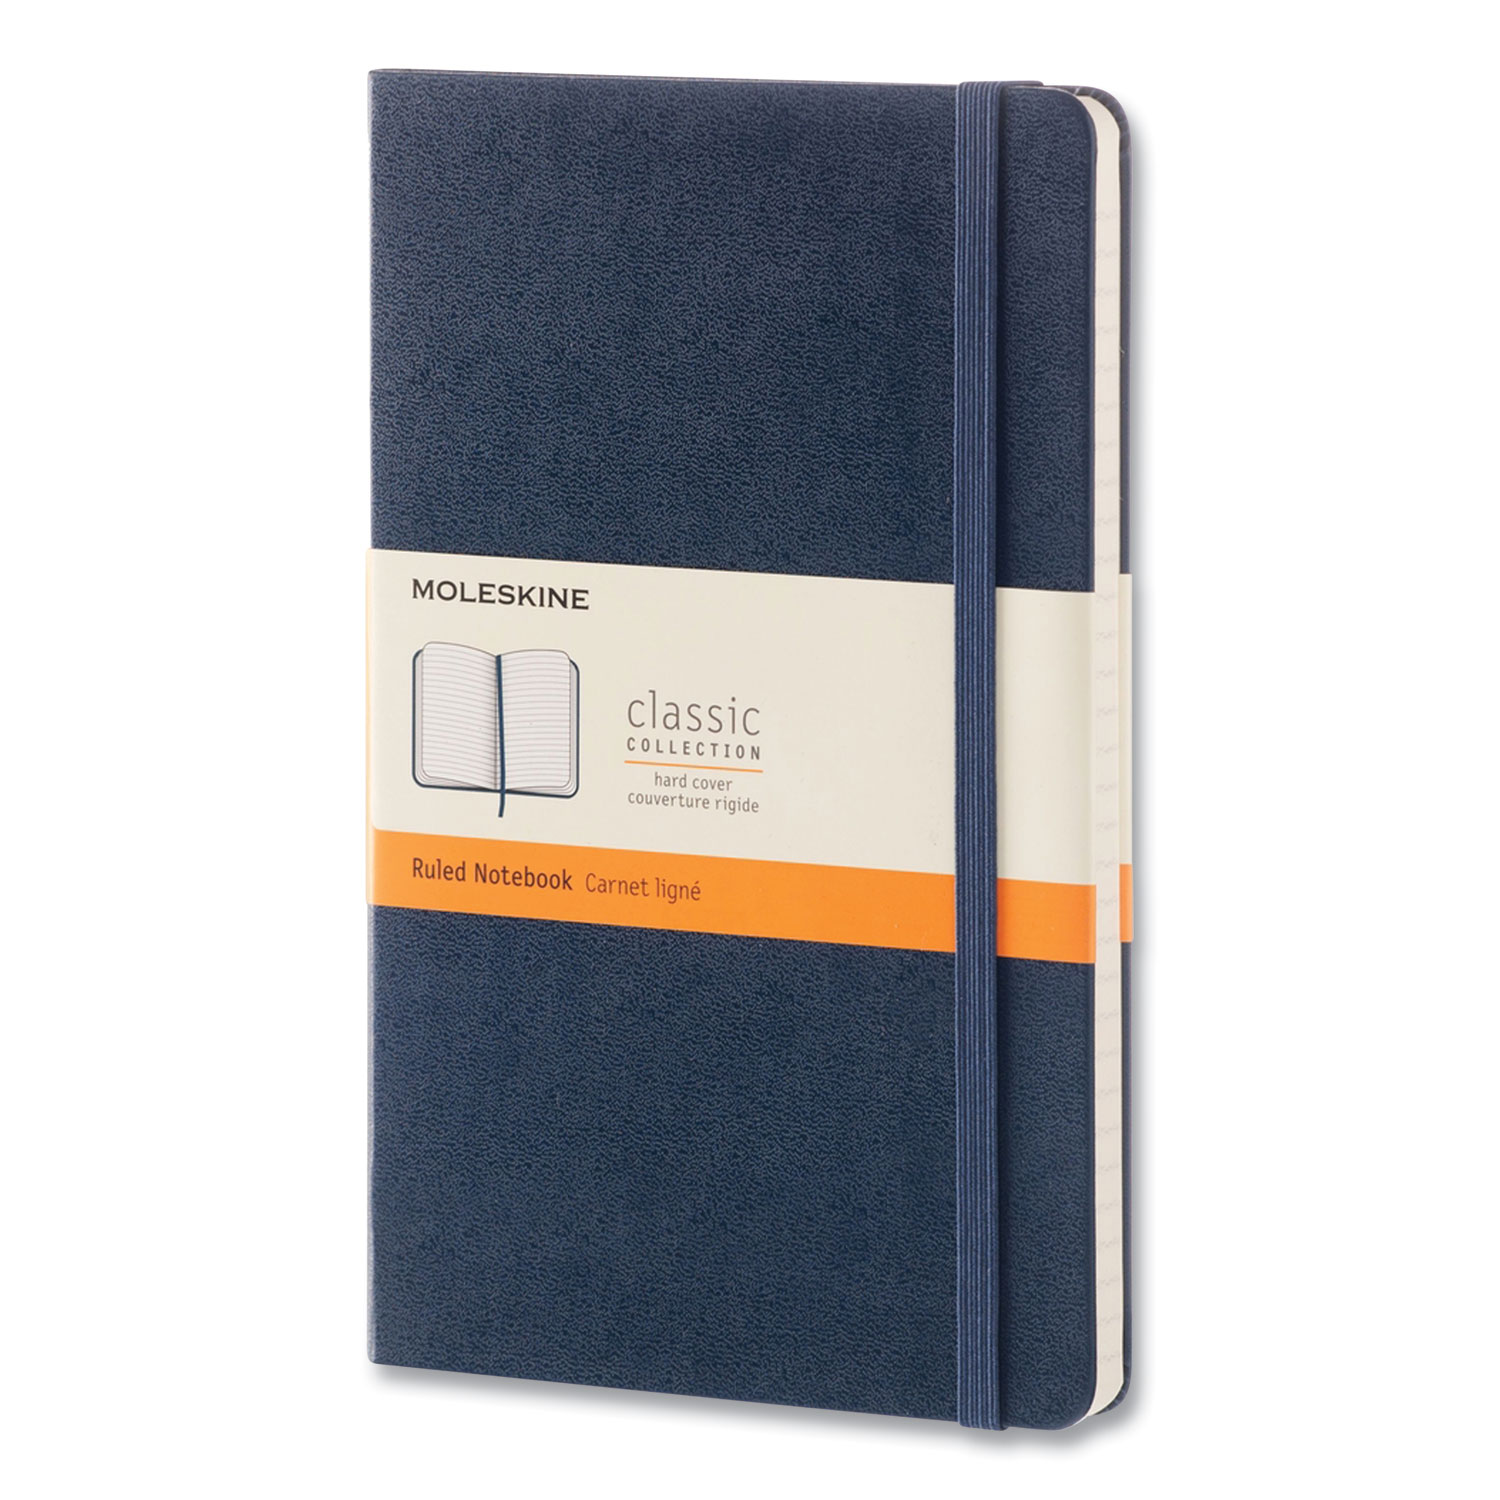  Moleskine 893601 Classic Collection Hard Cover Notebook, Dotted Rule, Sapphire Blue Cover, 5 x 8.25, 240 Sheets (HBG2071318) 